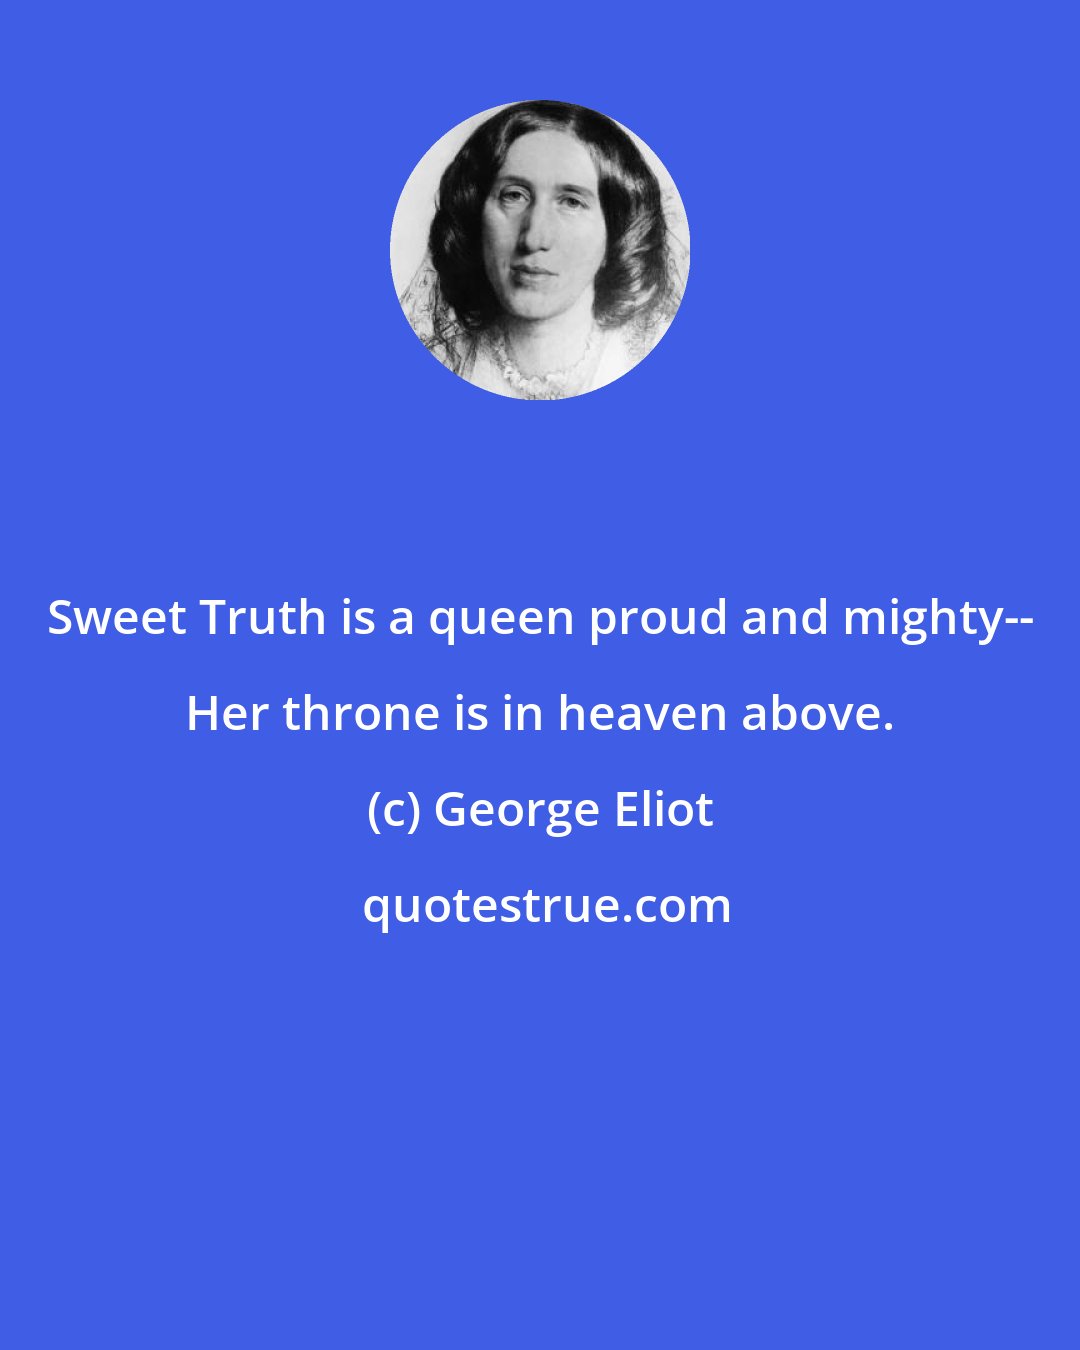 George Eliot: Sweet Truth is a queen proud and mighty-- Her throne is in heaven above.